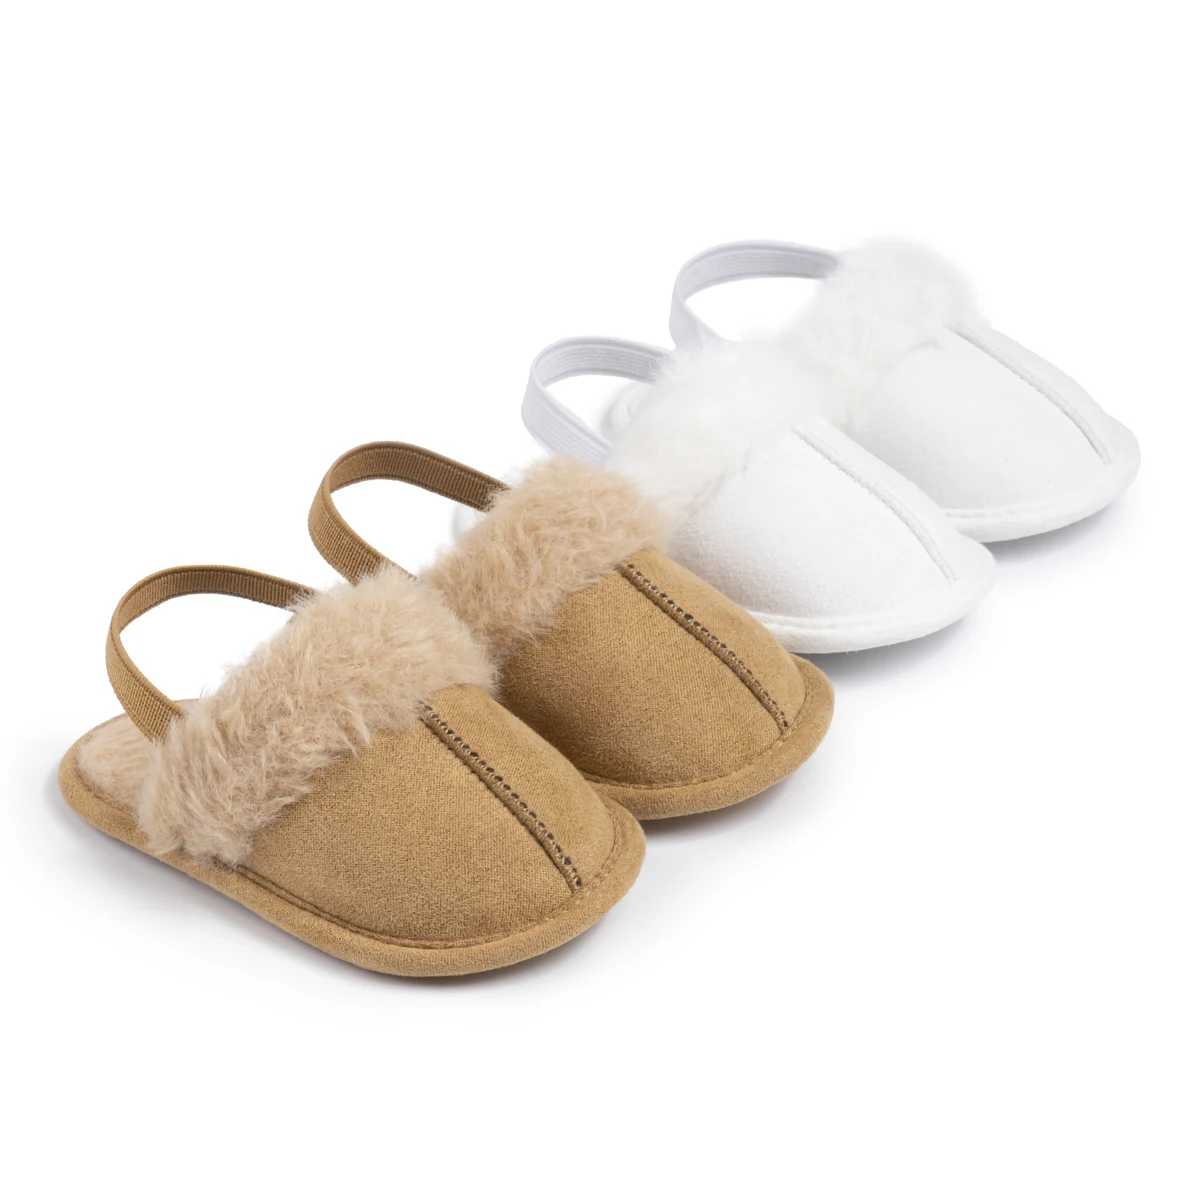 New Arrival Summer Cotton Infant Anti-Slip Baby Slippers & Sandals For Comfort Security Baby Shoes